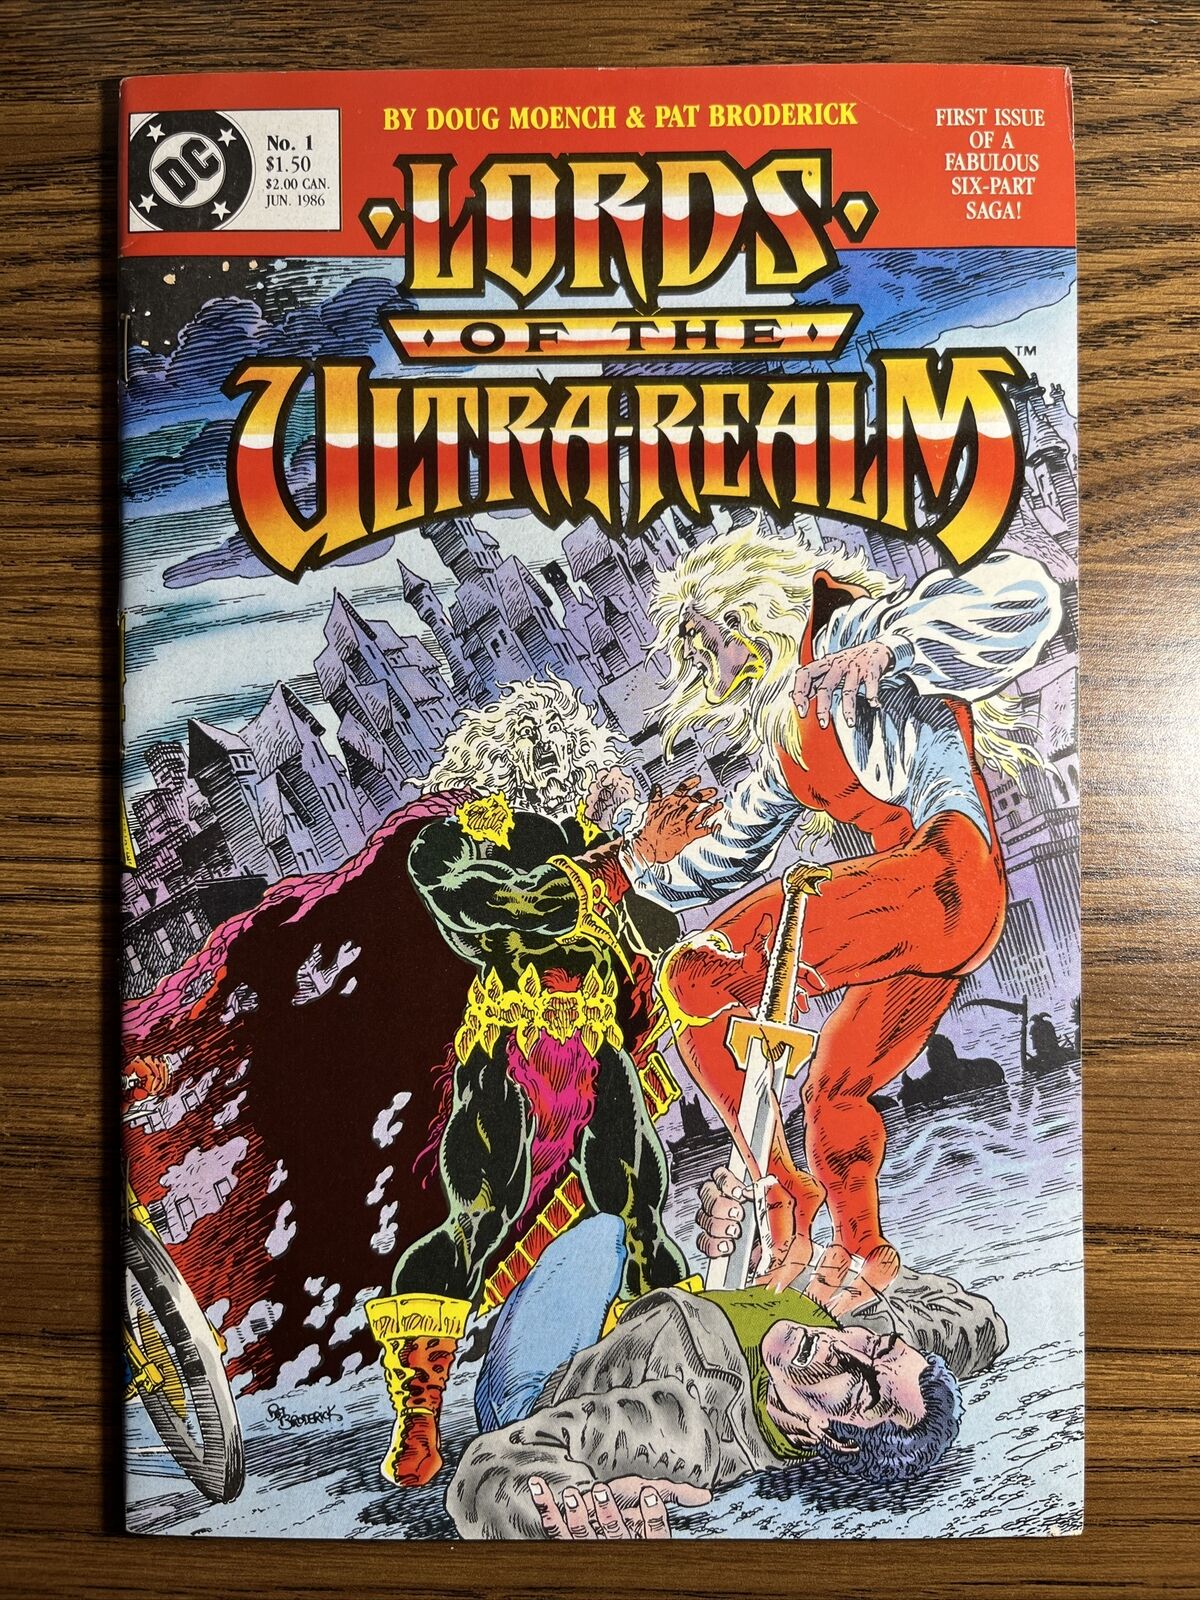 LORDS OF THE ULTRA REALMS NO 1 PAT BRODERICK COVER  Doug Moench DC COMICS 1986